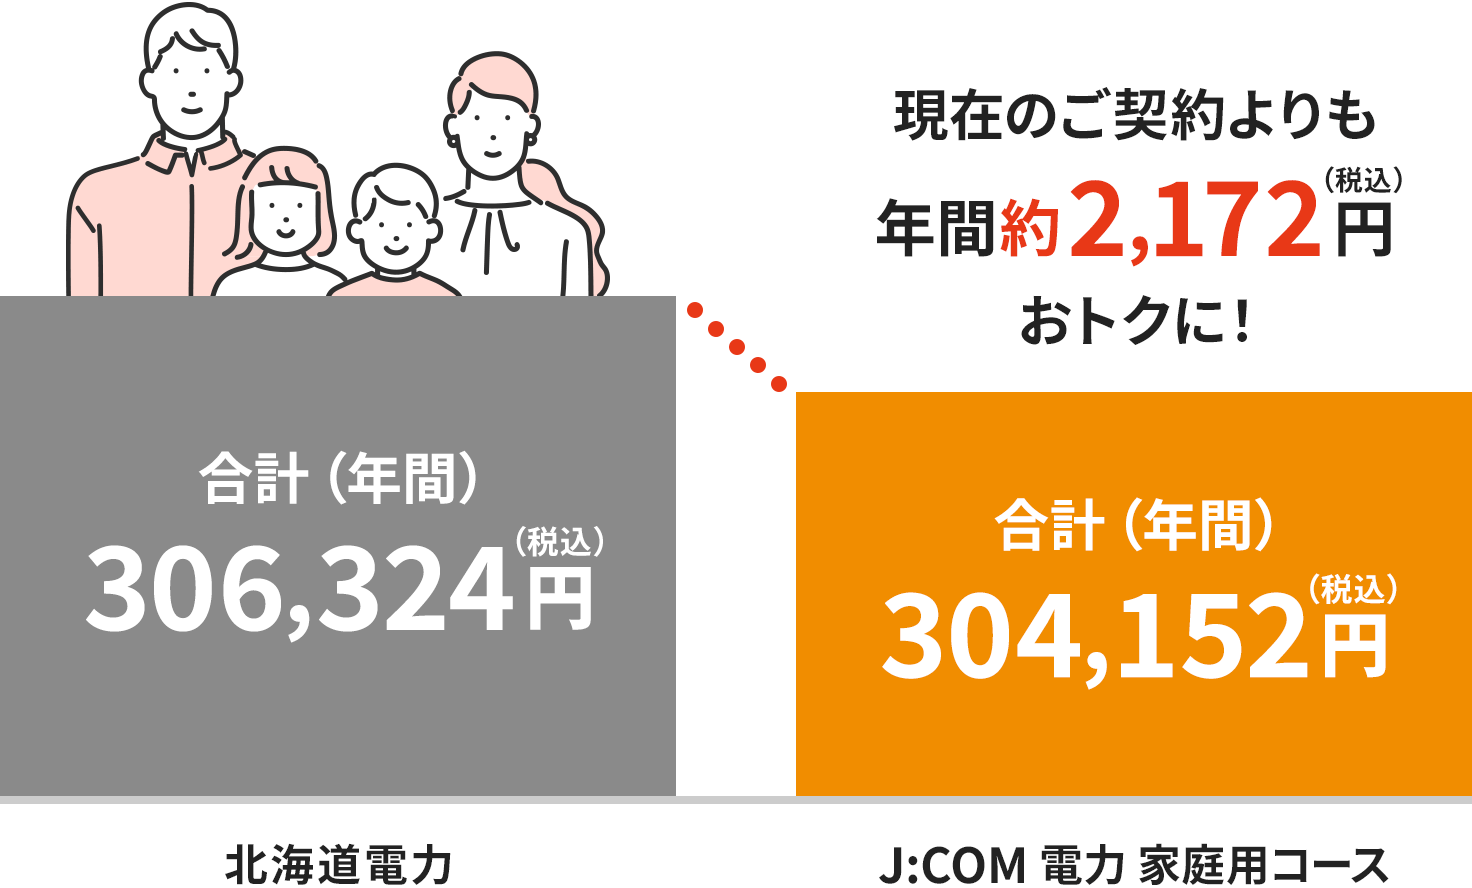 Image of charges in Hokkaido Electric Power area (for a four-person household)